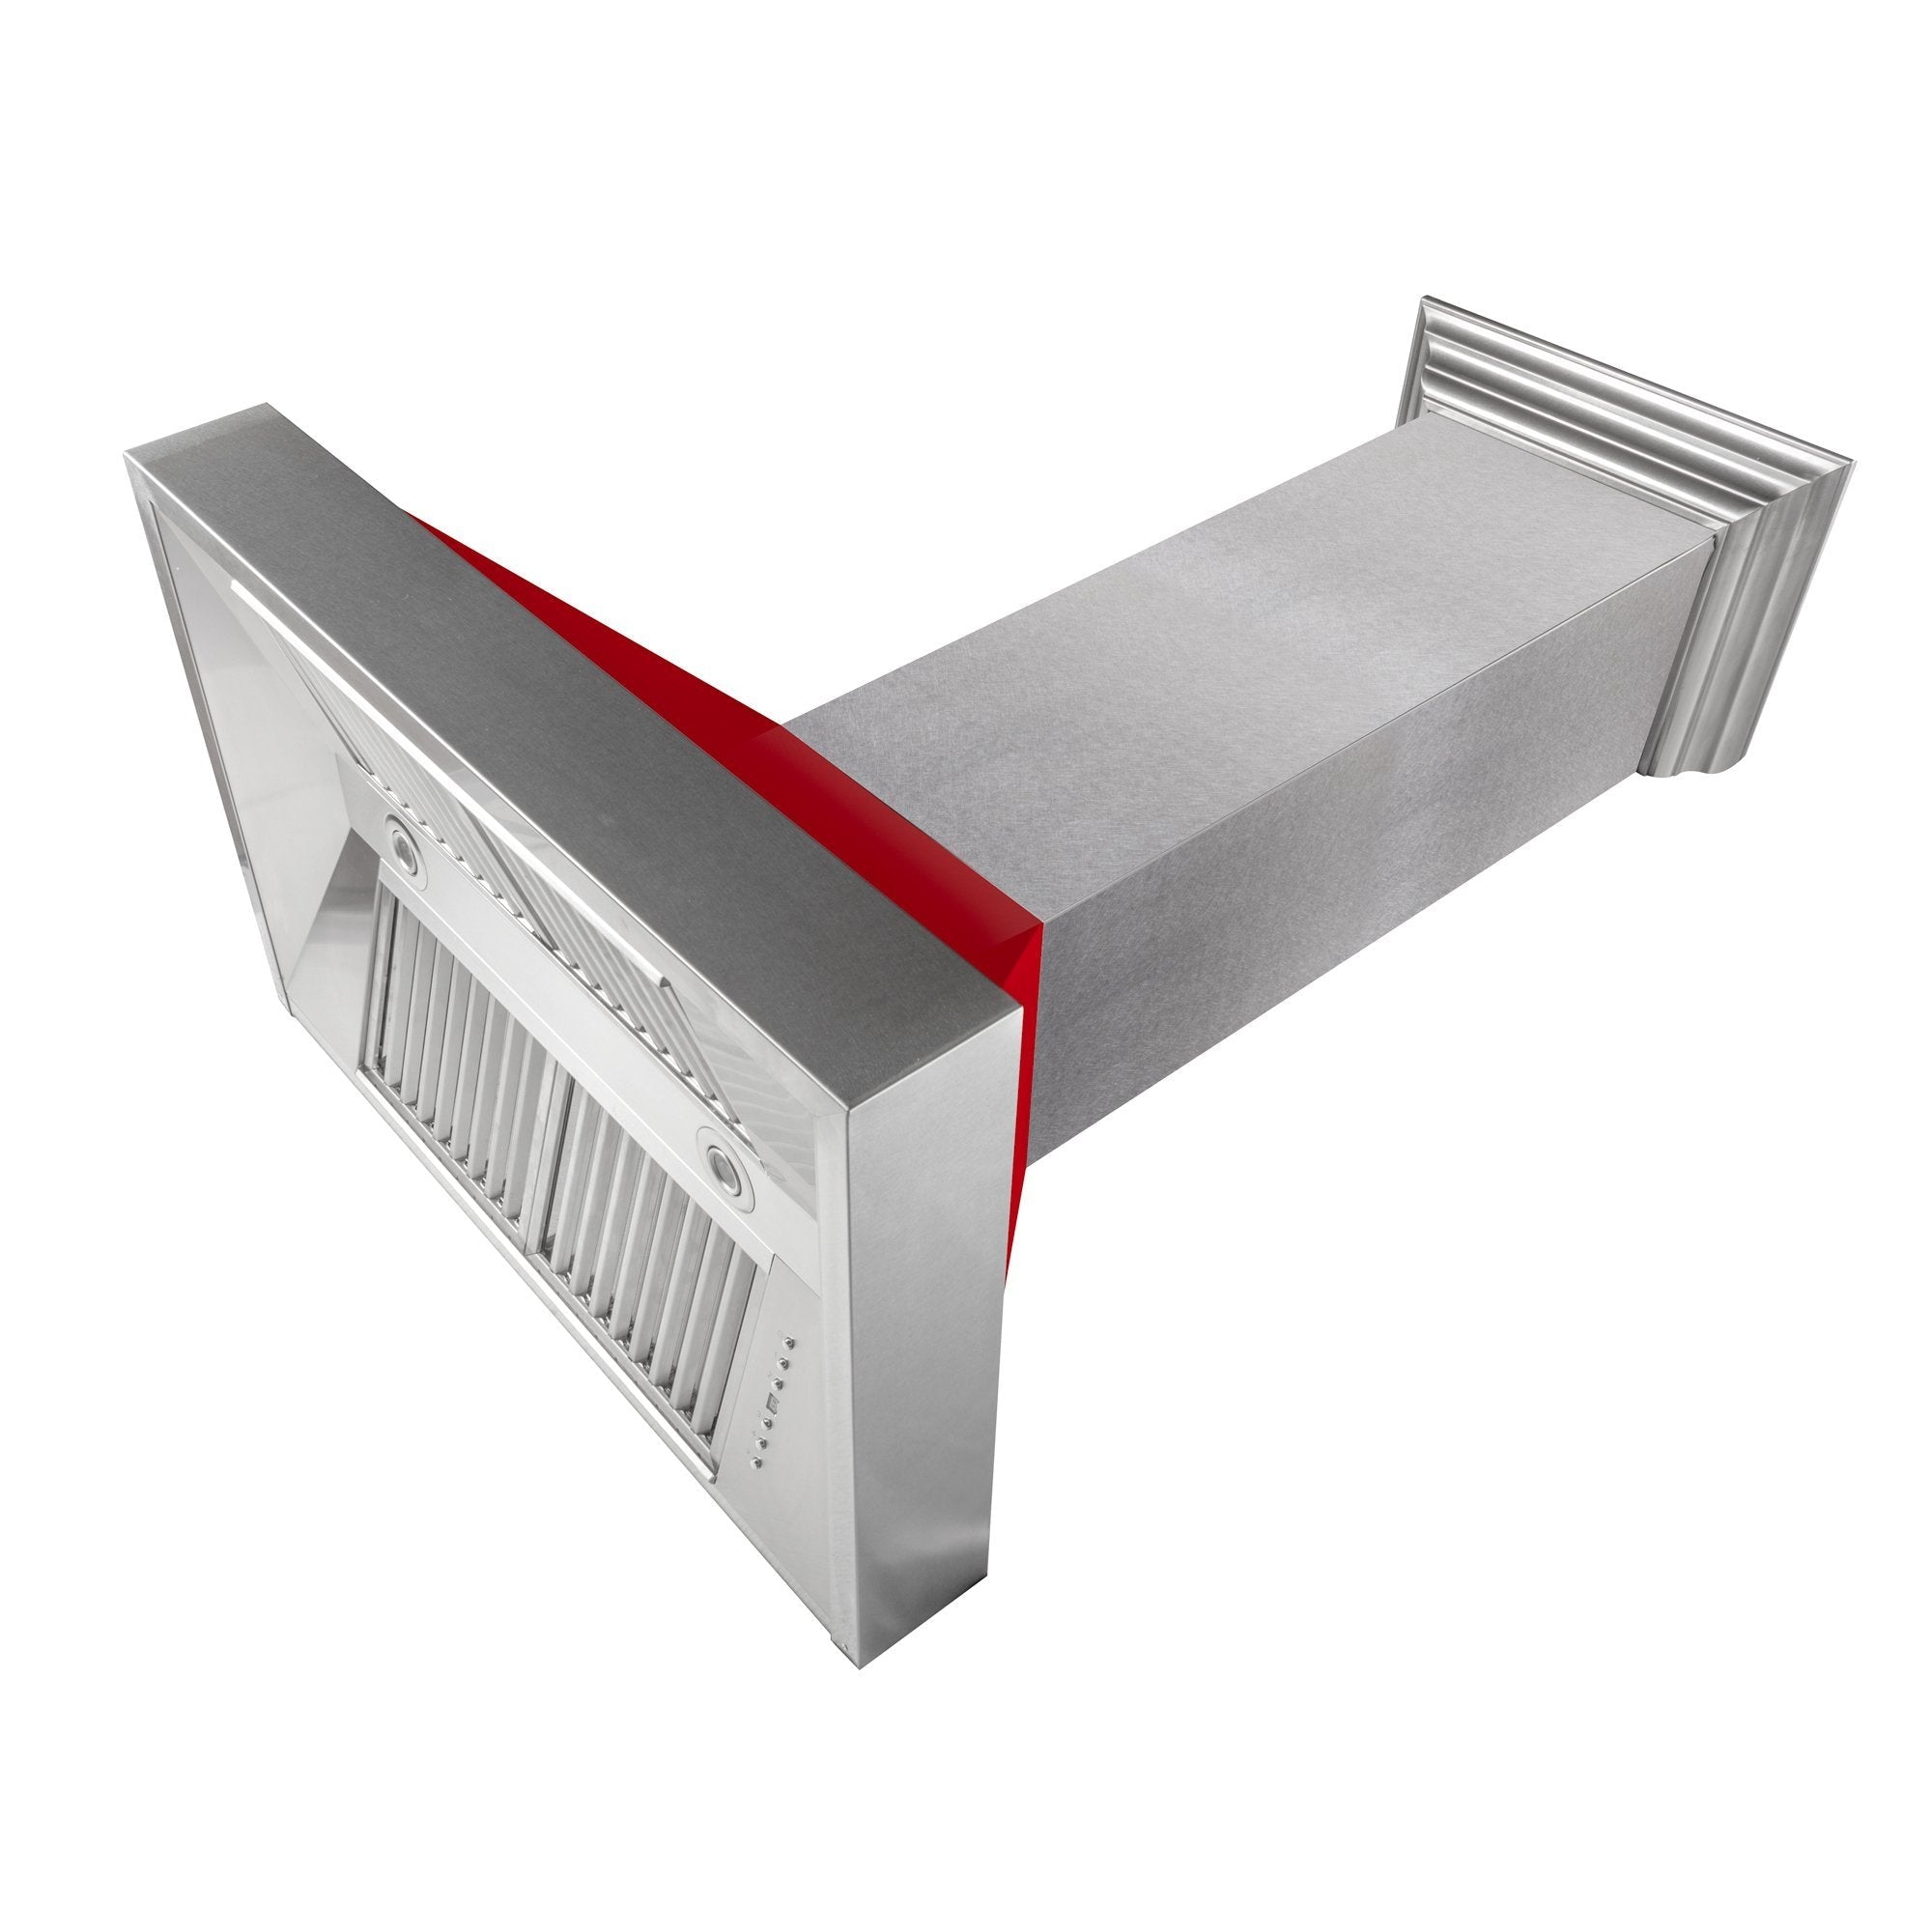 ZLINE Ducted DuraSnow Stainless Steel Range Hood with Red Gloss Shell (8654RG) - New Star Living